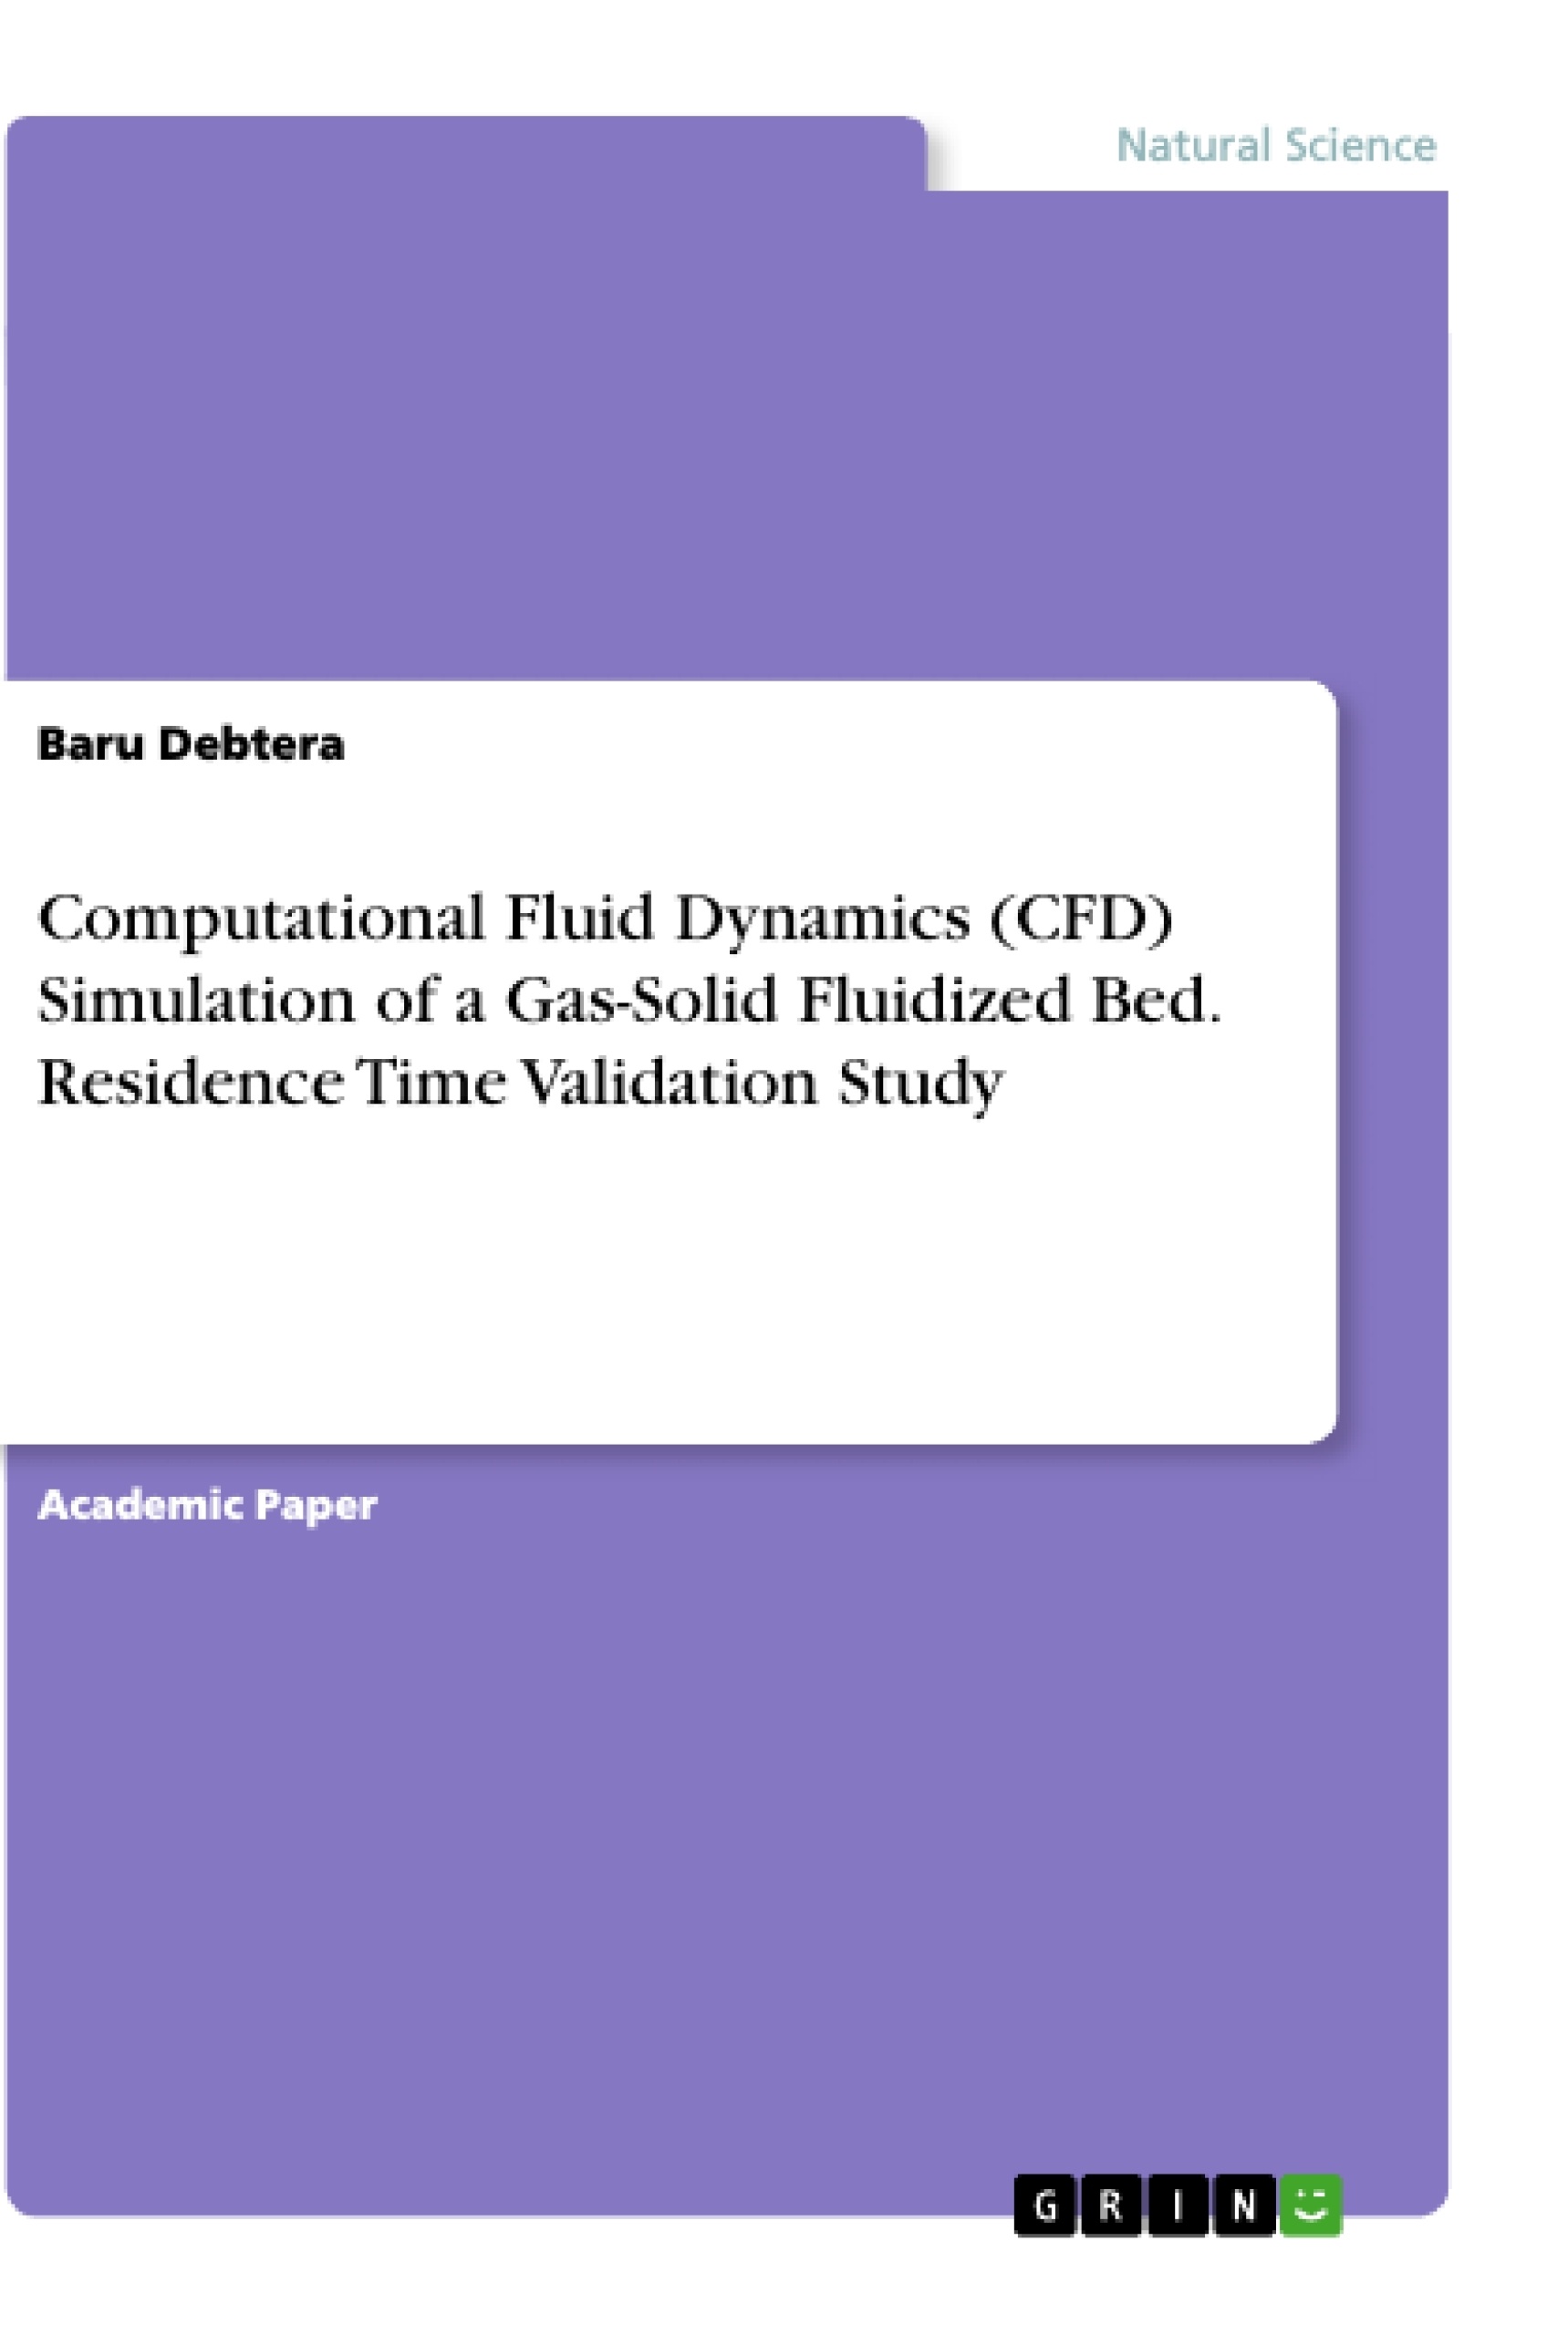 Title: Computational Fluid Dynamics (CFD) Simulation of a Gas-Solid Fluidized Bed. Residence Time Validation Study